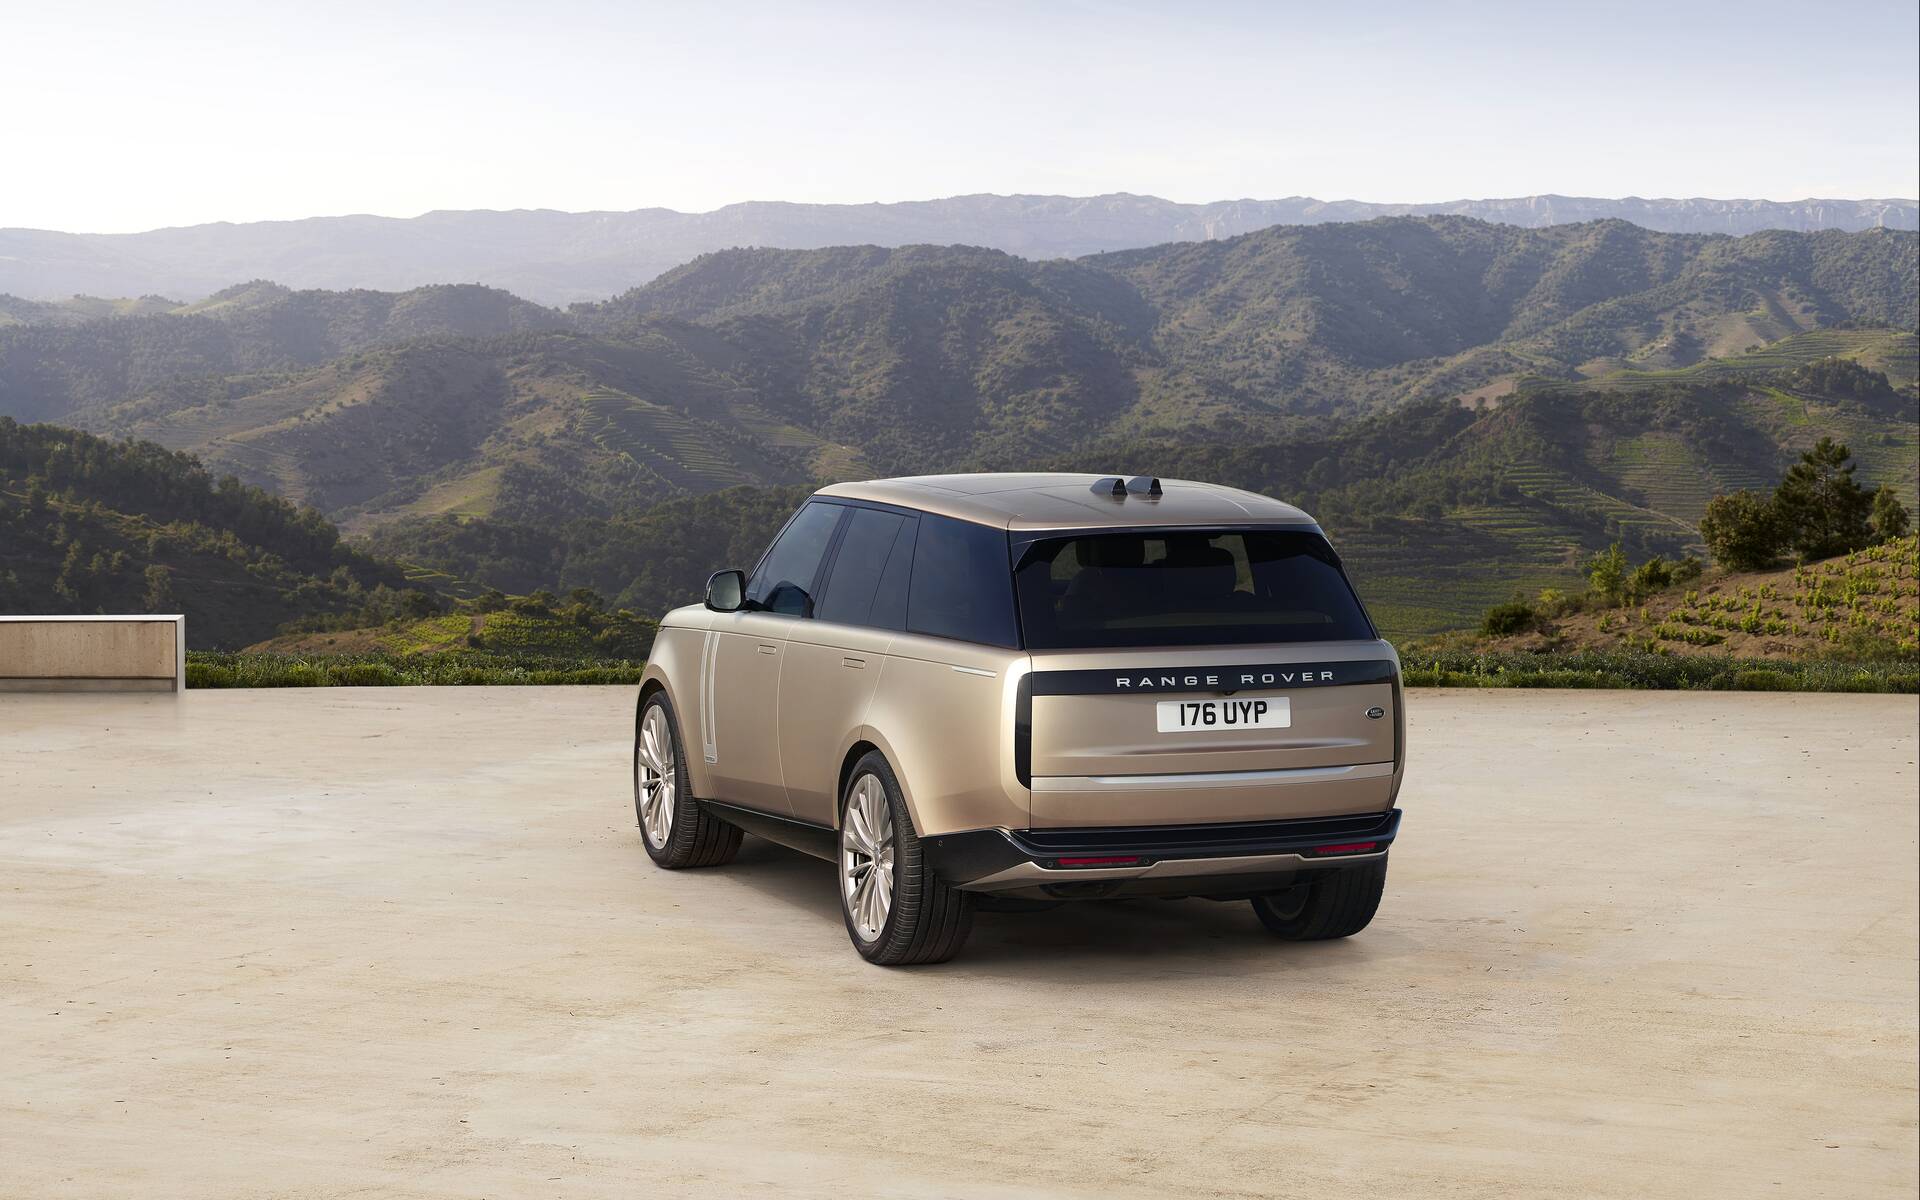 2022 Range Rover - interior and Exterior Details (Most luxurious Range Rover)  